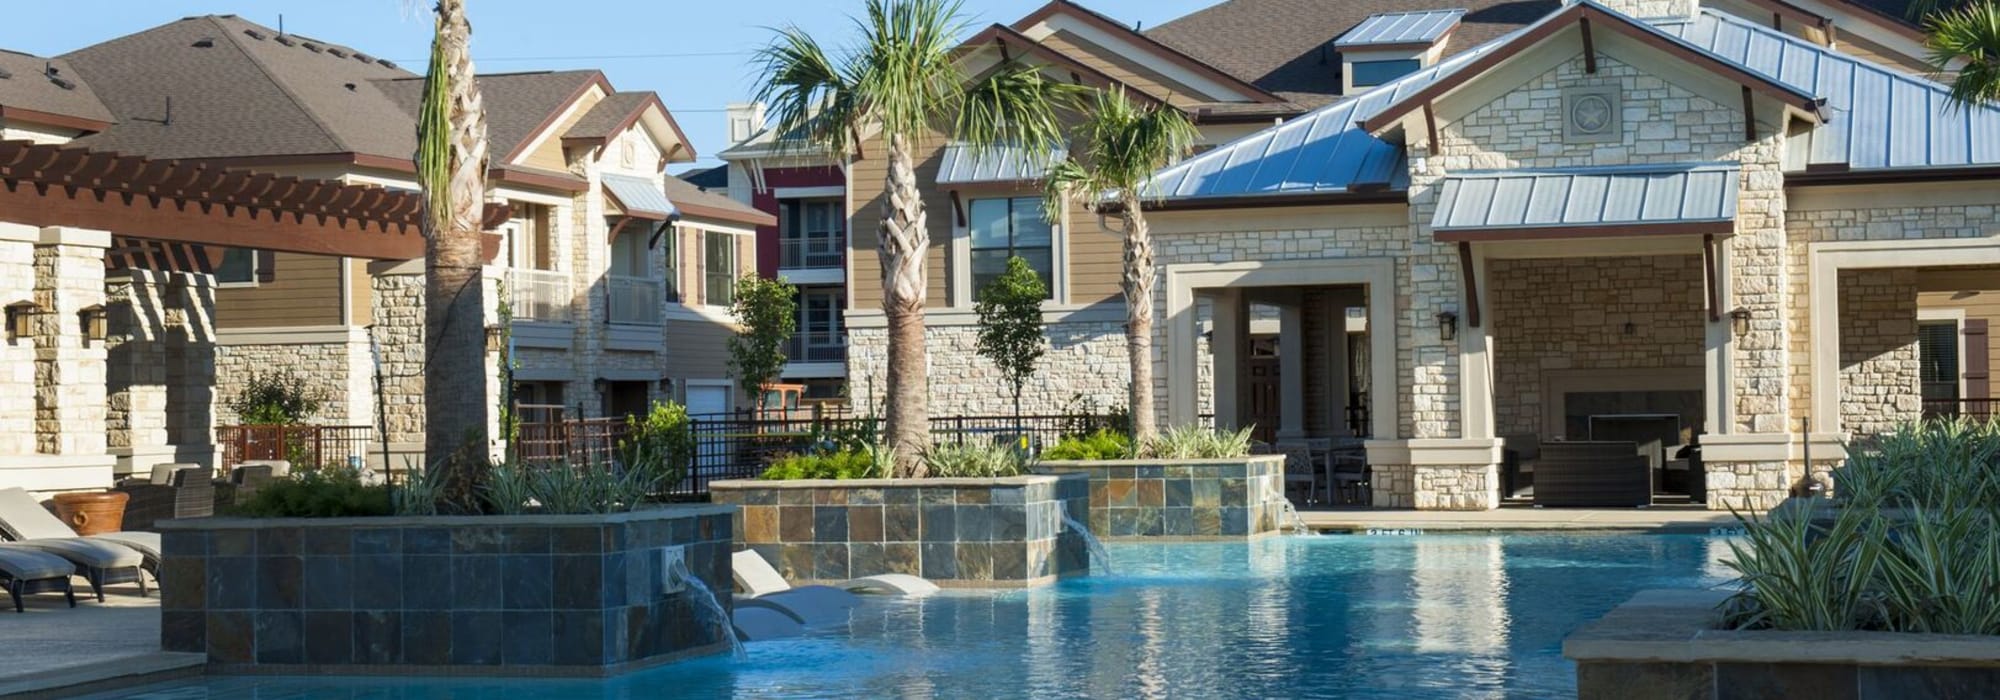 Shimmering pool with spigots at The Crossing at Katy Ranch in Katy, Texas